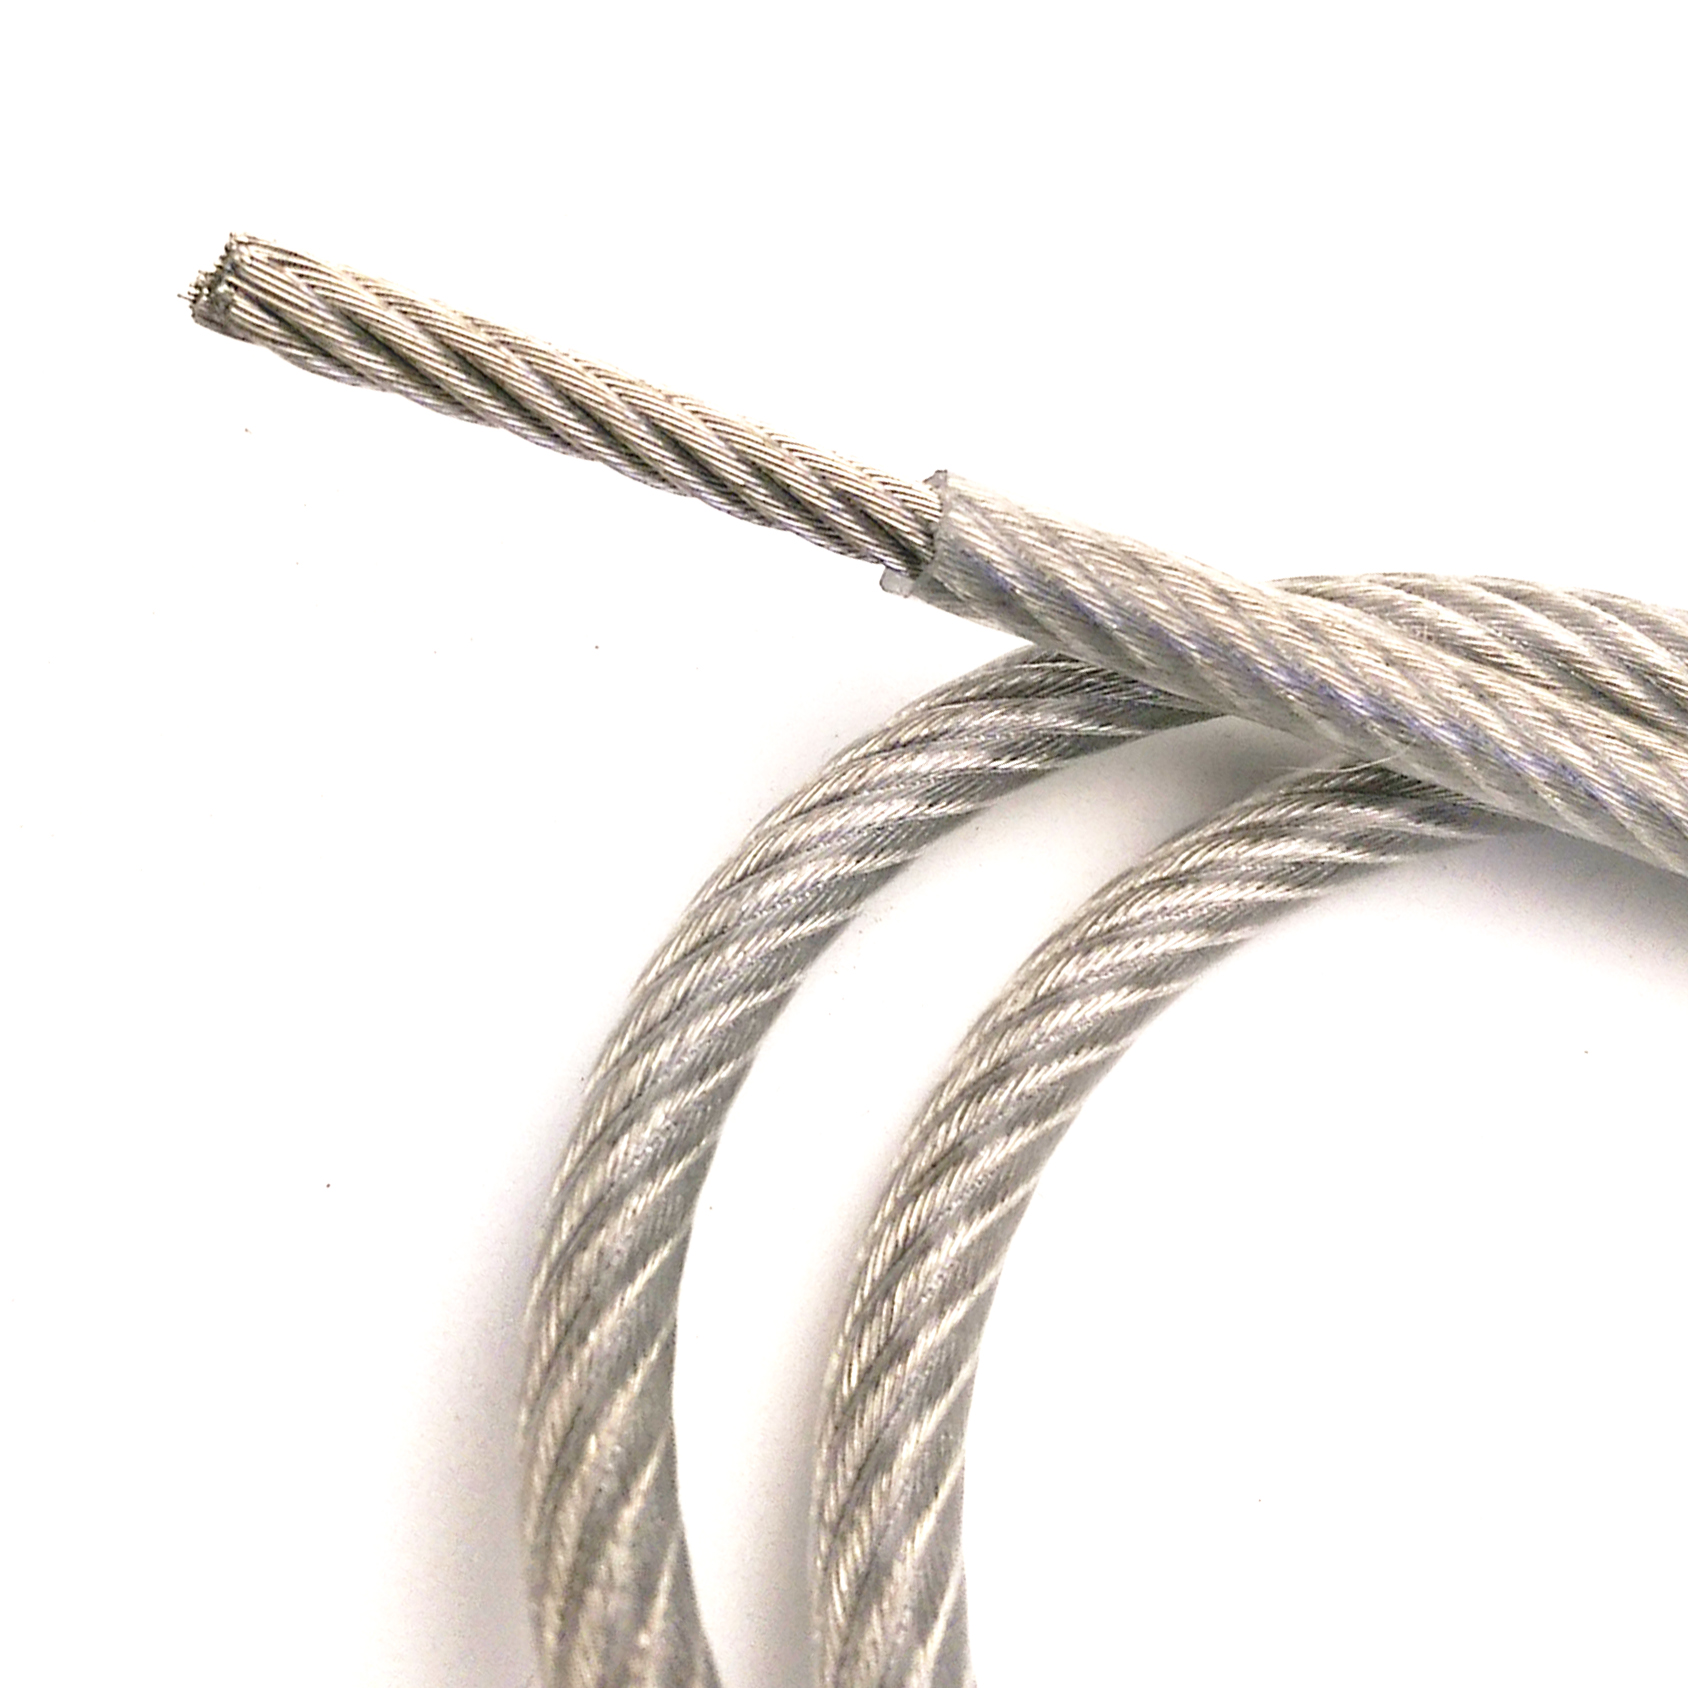 Made to Order General Purpose Guide Wire Suspension Safety Braided Cable PSI Double Loops Aluminum Sleeves 4 feet, White Galvanized Steel 3/16 Vinyl Coated Wire Rope 7x19 Strand 1/8 Core